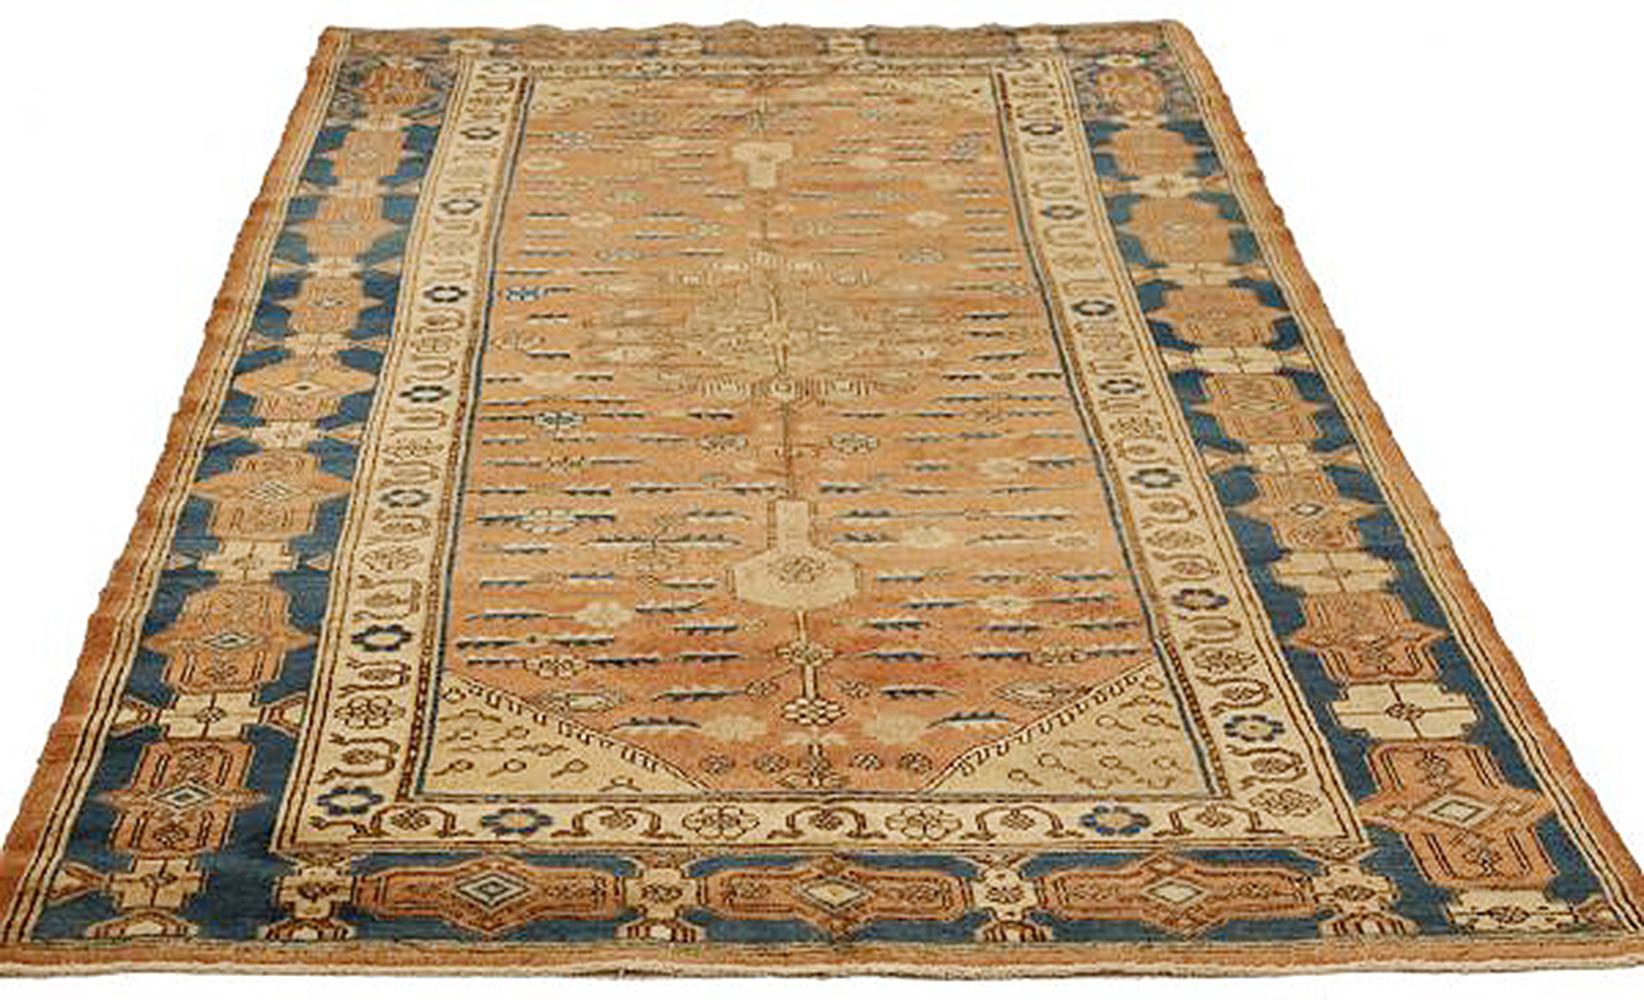 Antique Russian rug handwoven from the finest sheep’s wool and colored with all-natural vegetable dyes that are safe for humans and pets. It’s woven using a Khotan design featuring a mix of floral patterns in blue and beige. It’s a beautiful piece